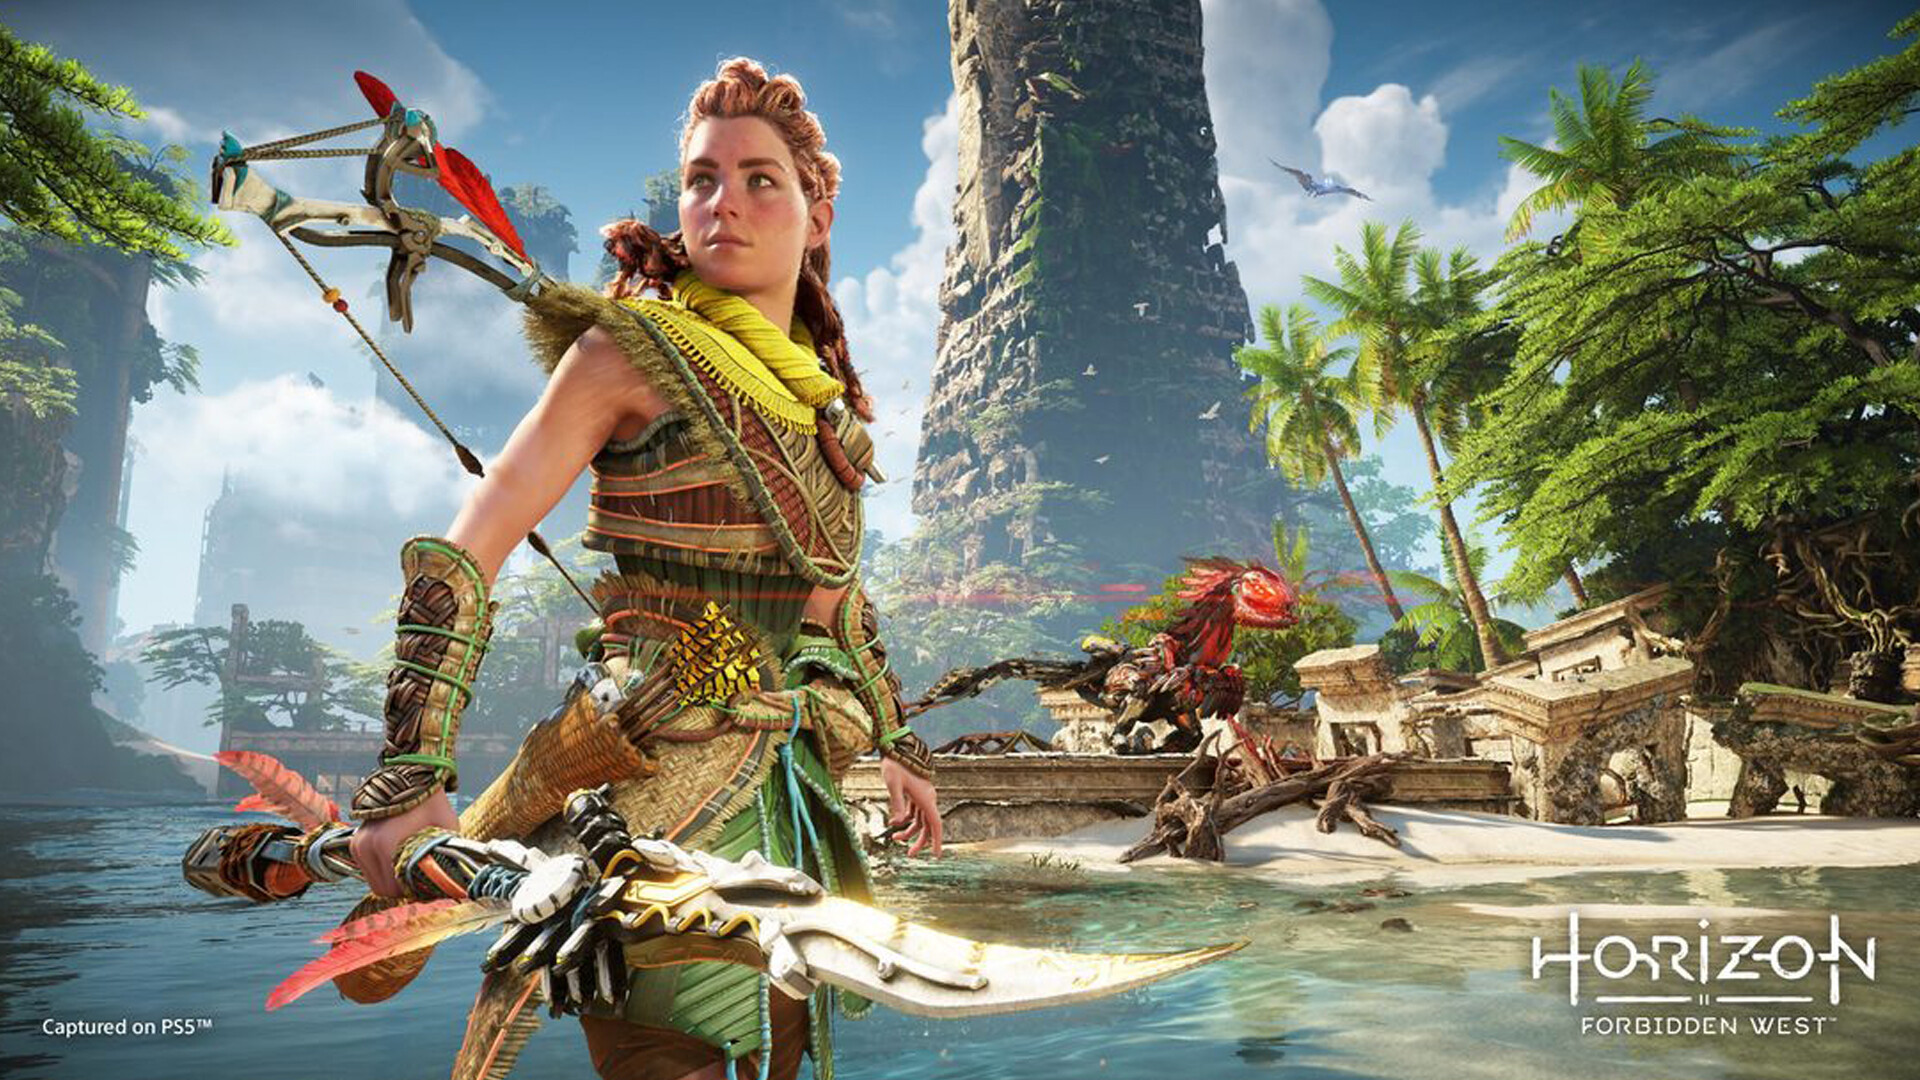 Horizon Forbidden West, Playstation Universe wallpapers, Exciting sequel, Aloy's journey, 1920x1080 Full HD Desktop